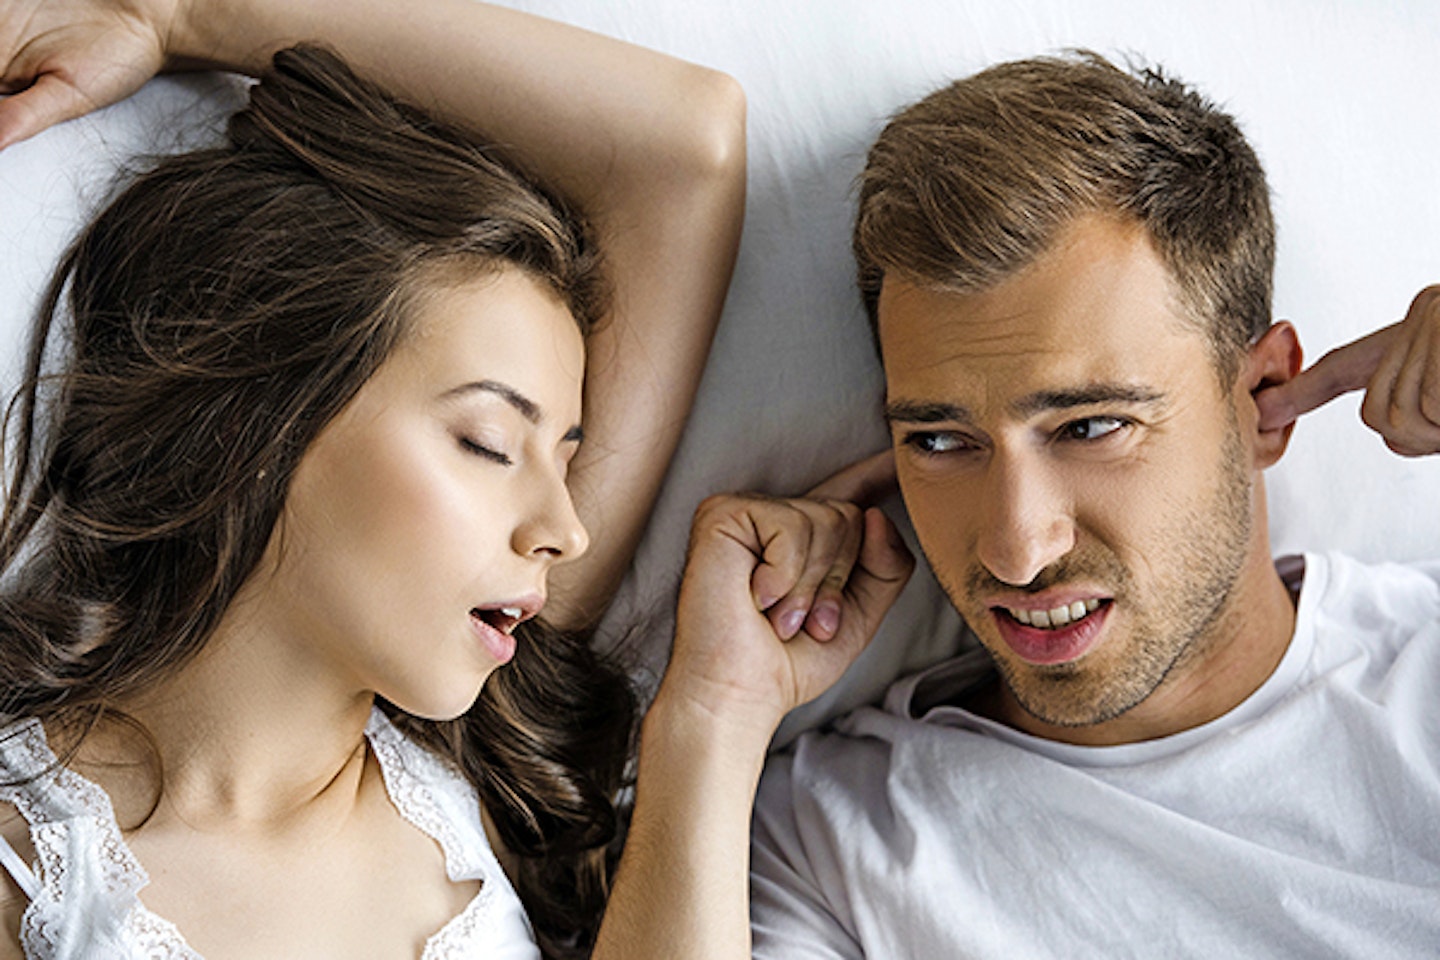 How to STOP SNORING